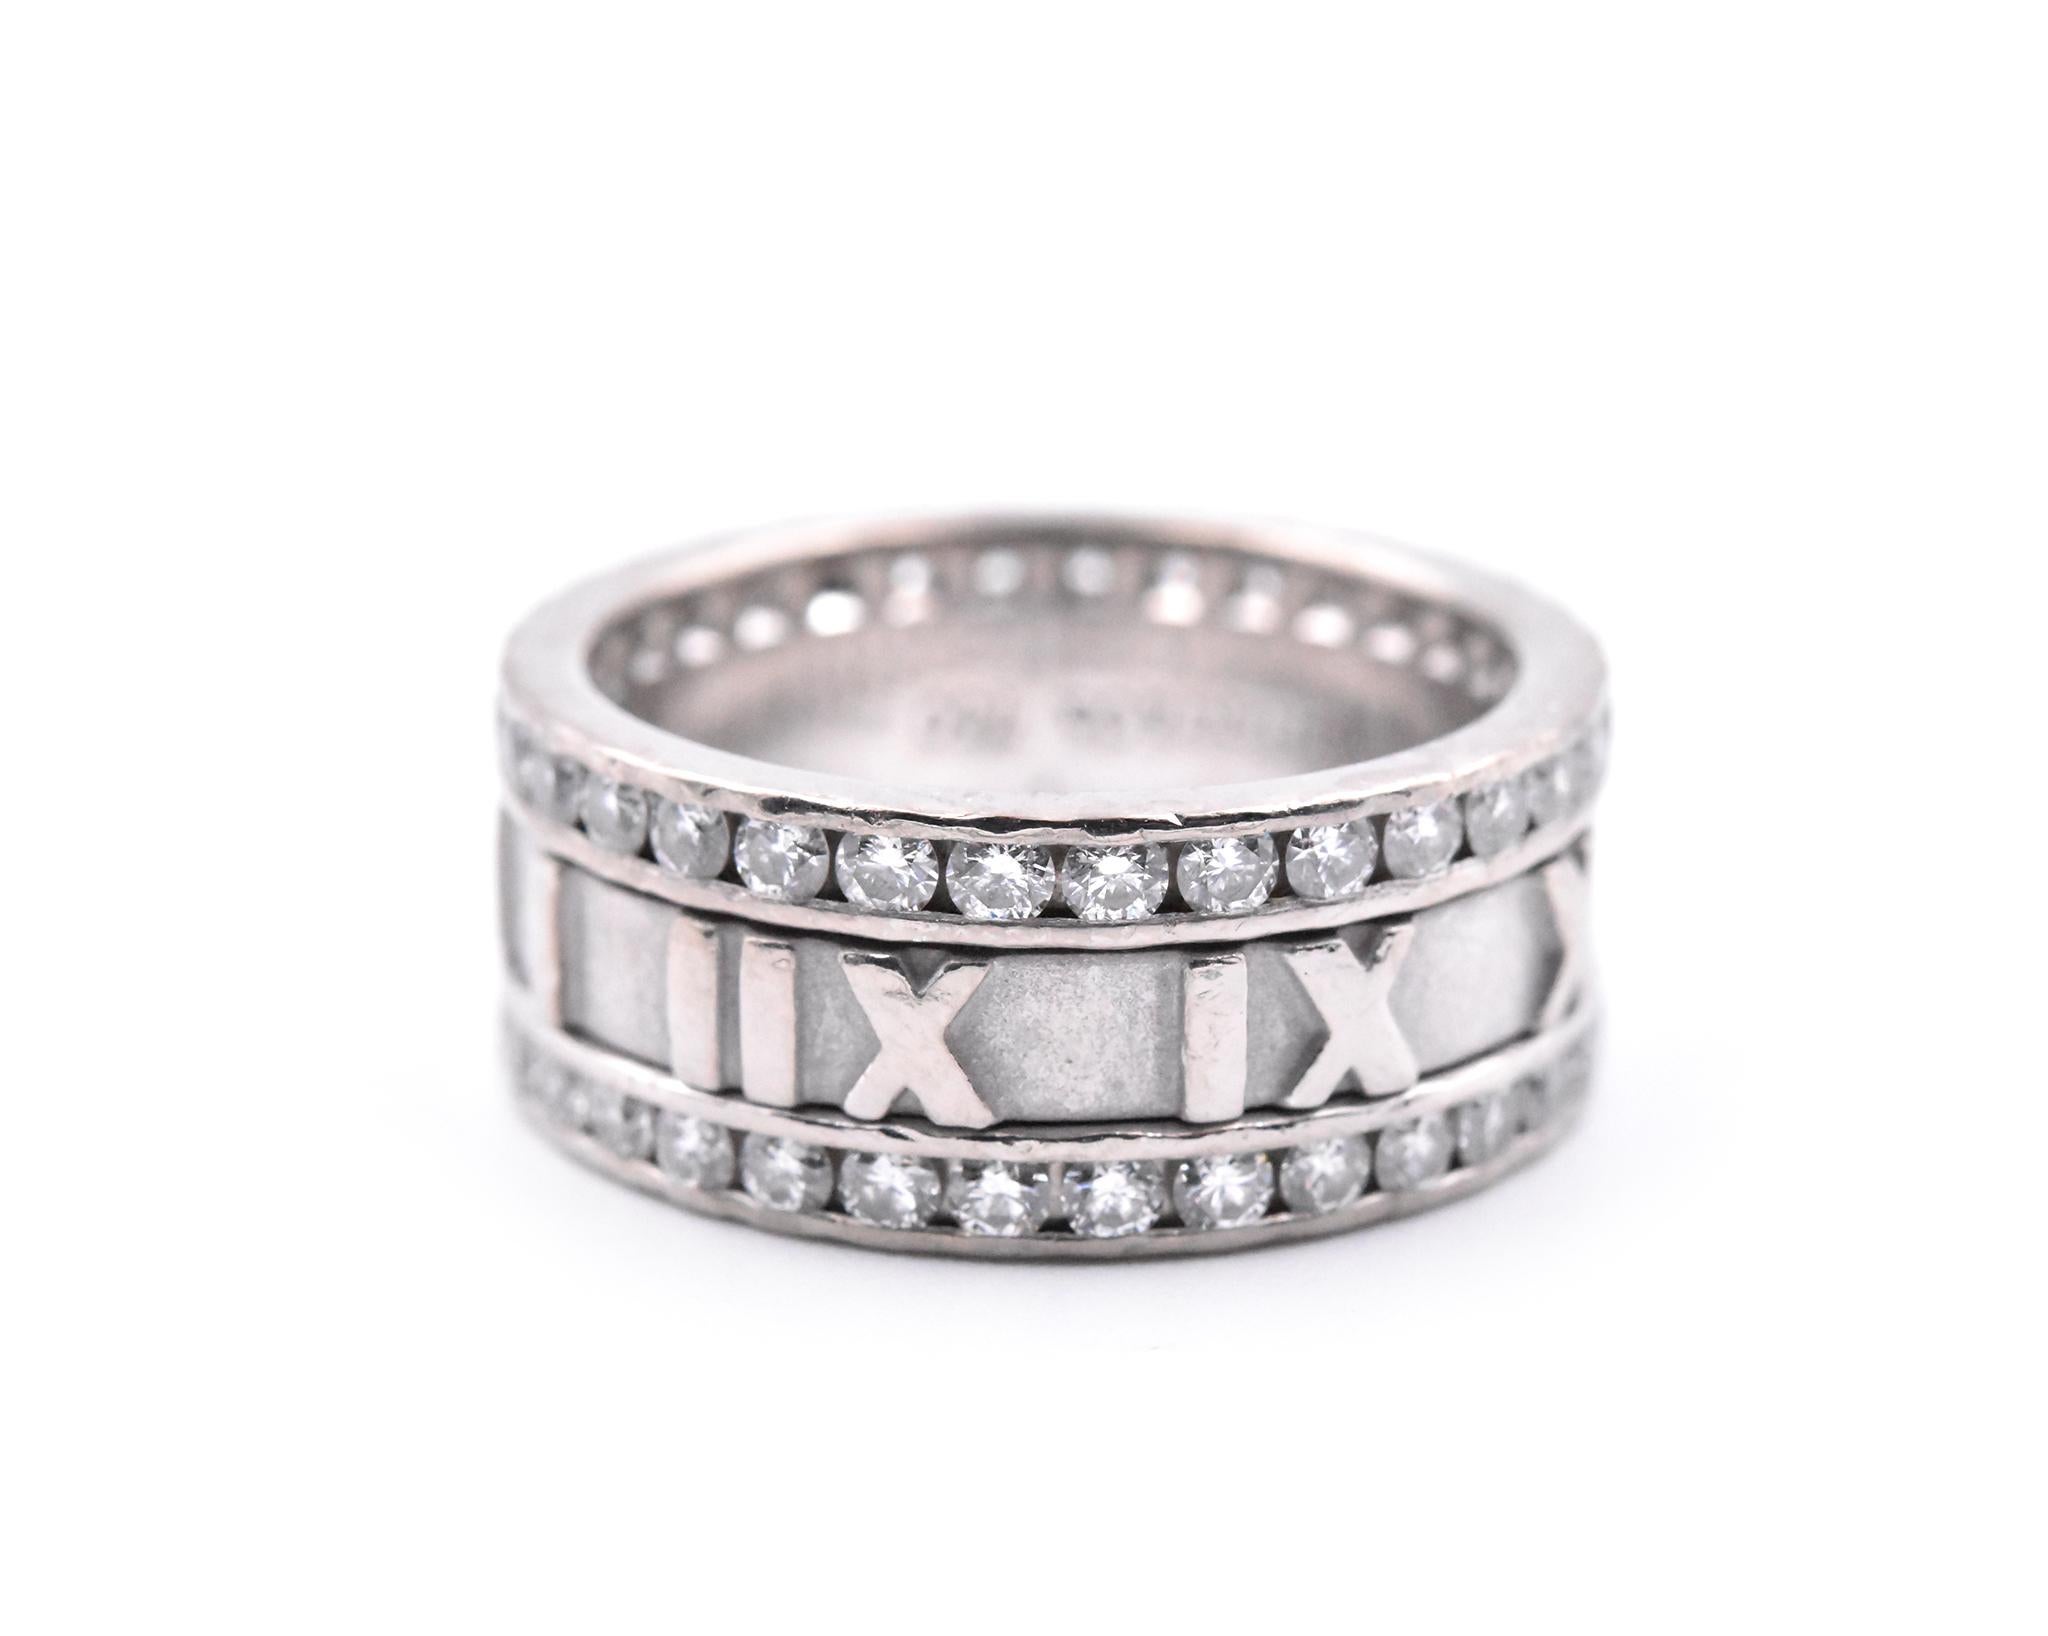 Designer: Tiffany & Co.
Material: 18k white gold
Diamonds: 64 round brilliant cuts = 1.28cttw
Color: F-G
Clarity: VS
Dimensions: ring measures 8.45mm wide
Weight: 11.28 grams
